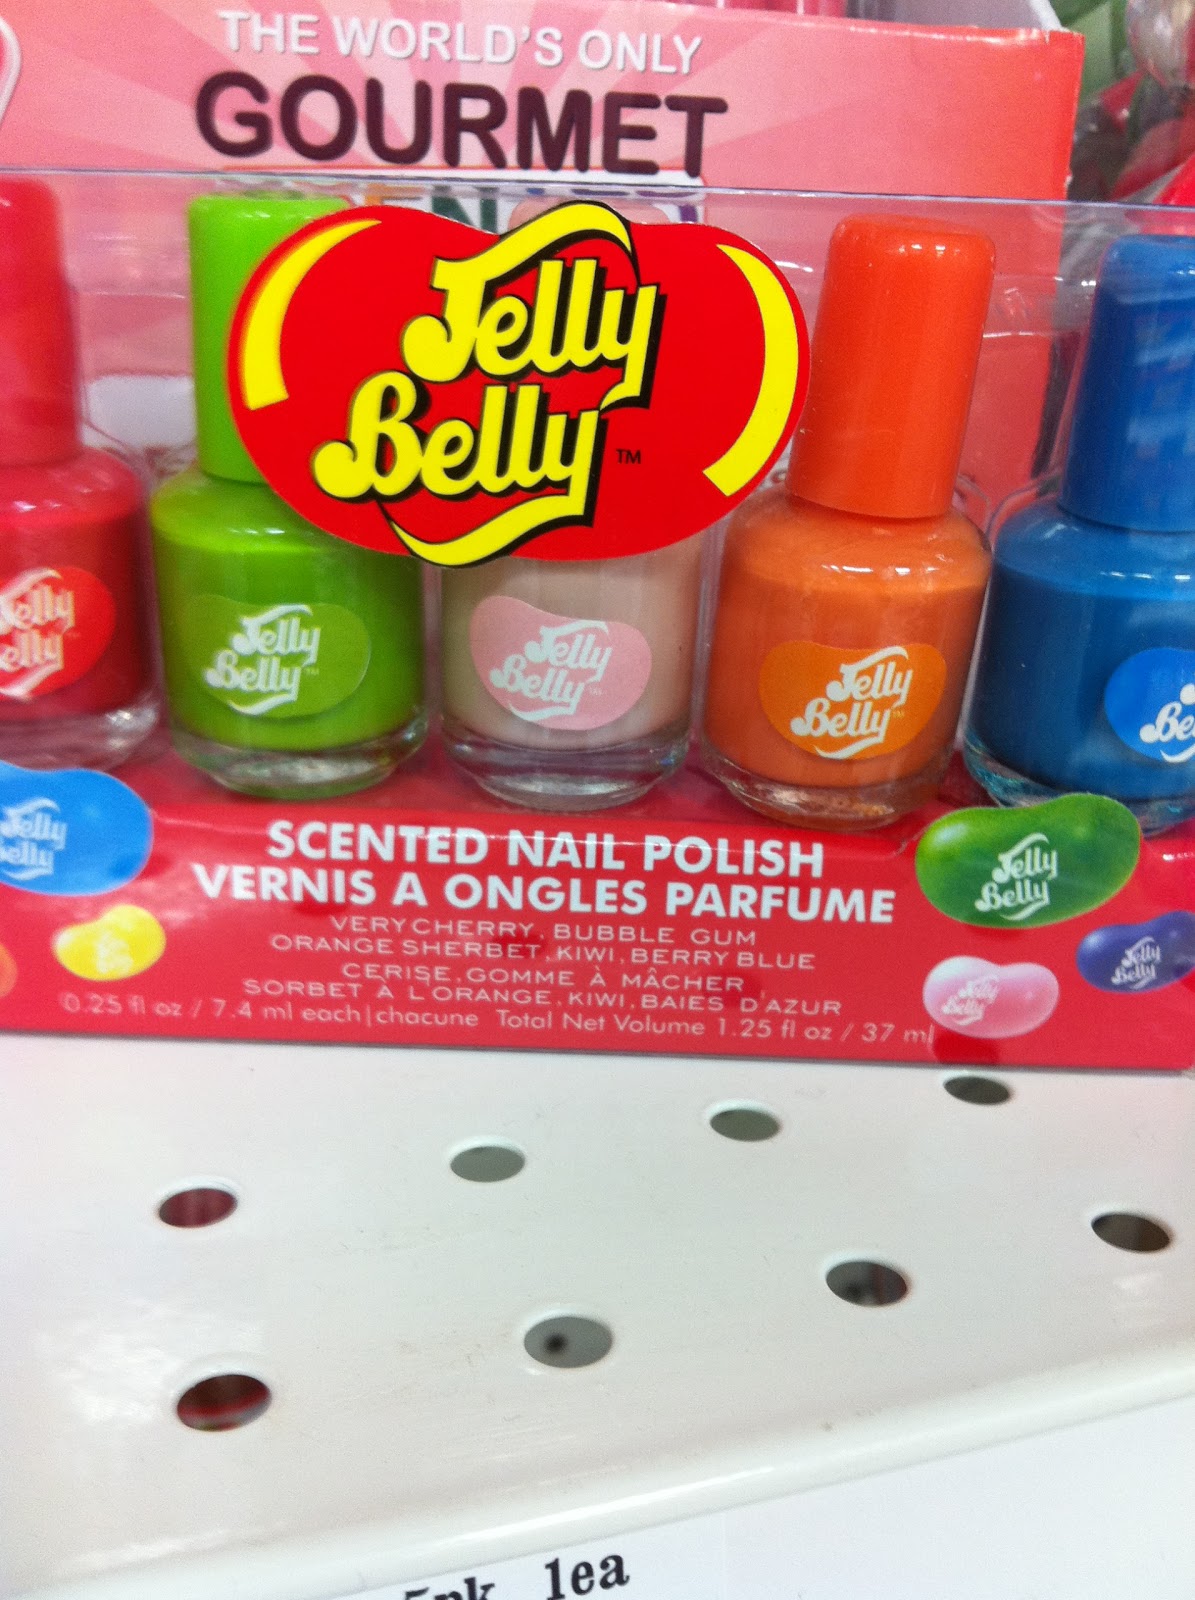 Jelly Belly scented nail polish! Saw this on the shelf of a local drugstore